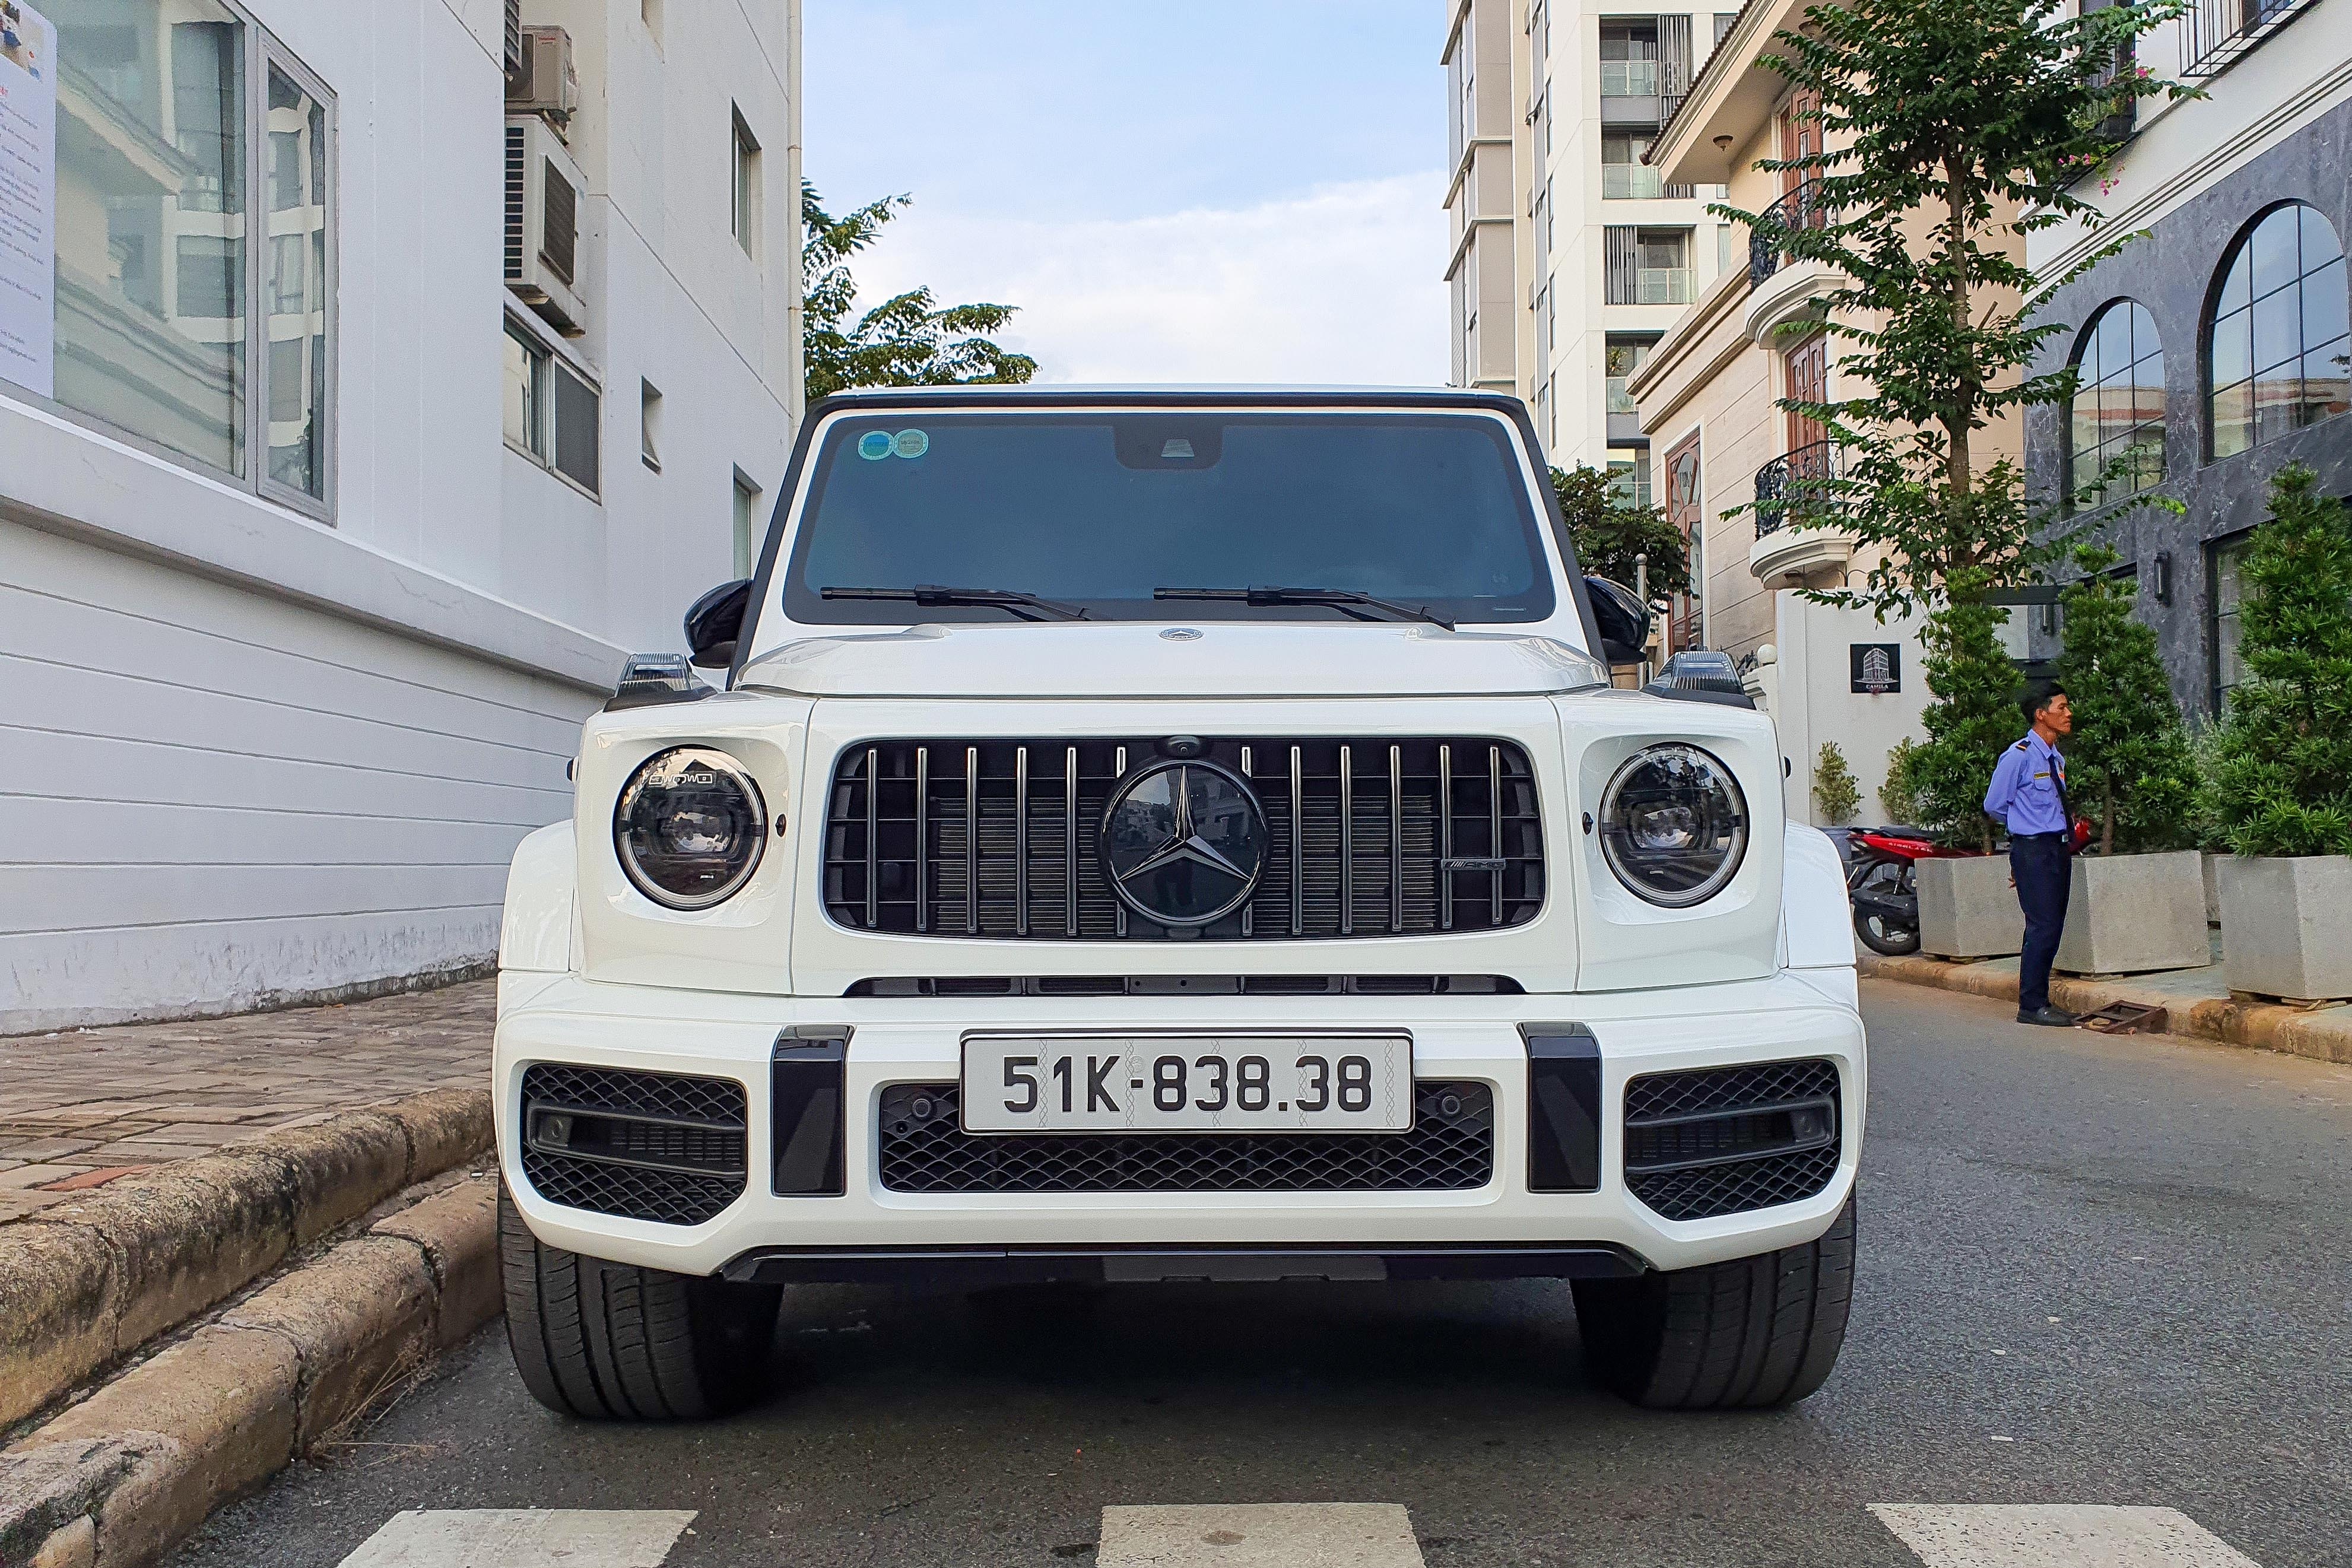 mercedes,  benz,  mercedes-benz,  amg,  mercedes-amg,  g63,  g 63,  edition 55,  g63 edition 55,  suv,  hieu suat cao,  g 63 edition 55 anh 9